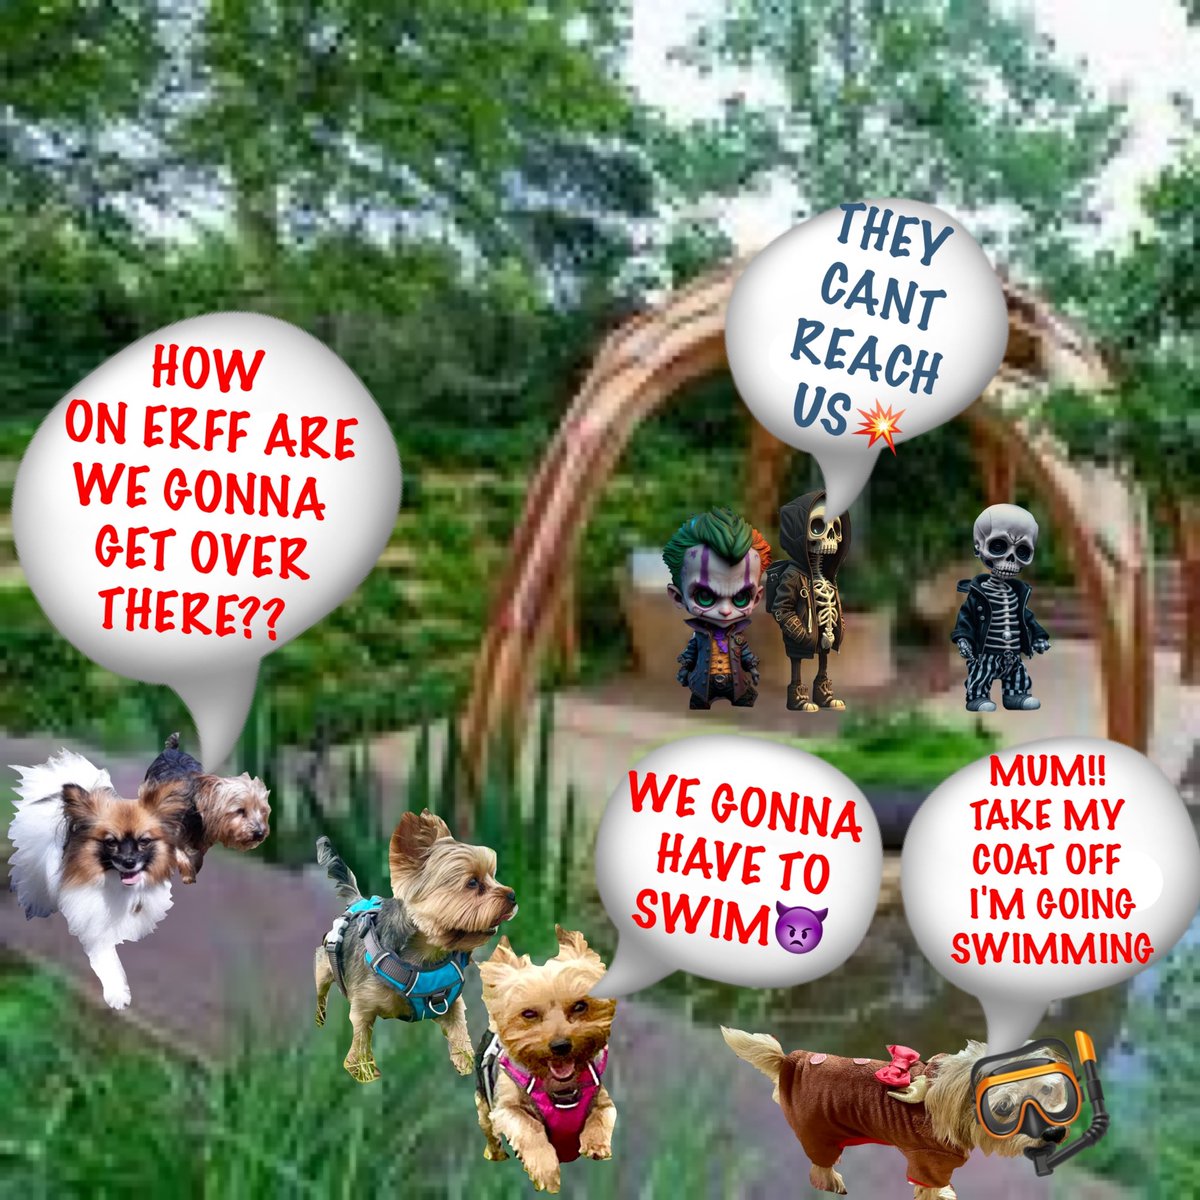 19 #zzst 🌸🪷💐🌷🌹🌼🪻🌺🌻🌸🪷💐🌹👍🏻
 WELL??   HOW DID THE ZOMBIES GET OVER TO THAT LITTLE ISLAND? THERE MUST BE A DRY WAY OR THEY WOUKD BE DUST!
🤨😳😵‍💫